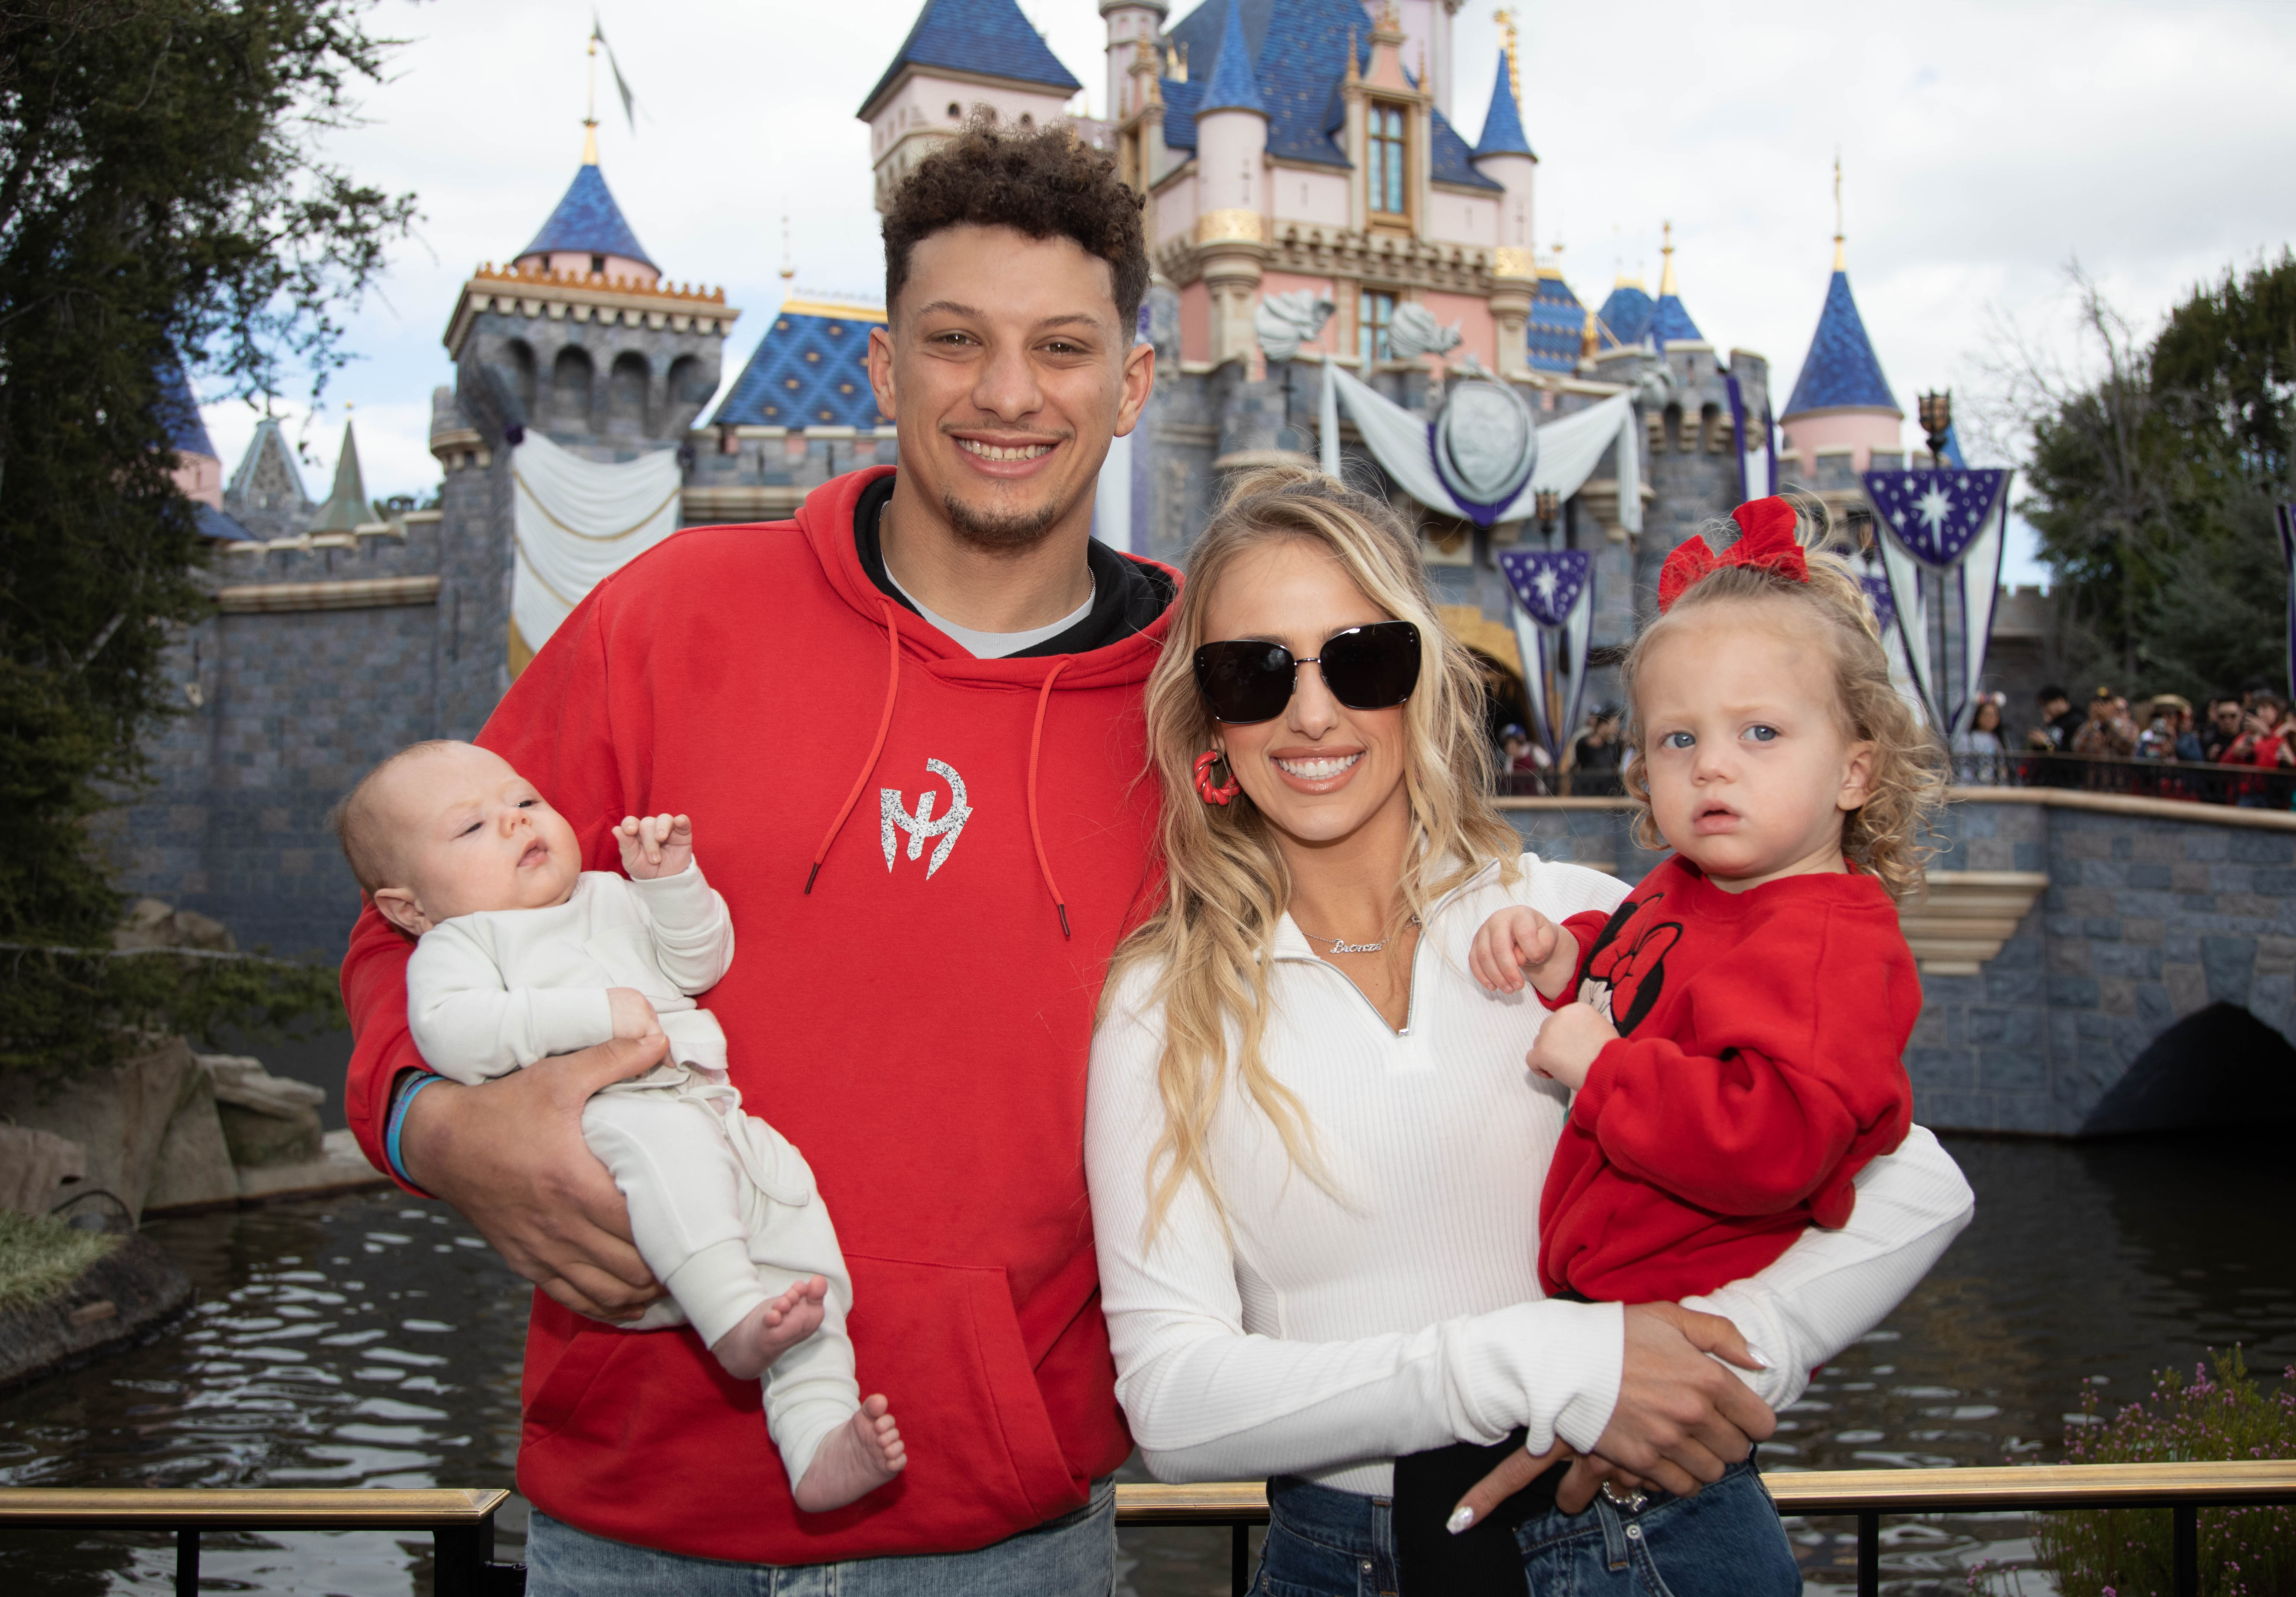 Patrick Mahomes yuks it up with Jimmy Kimmel about Disneyland, Super Bowl parties, Rihanna show